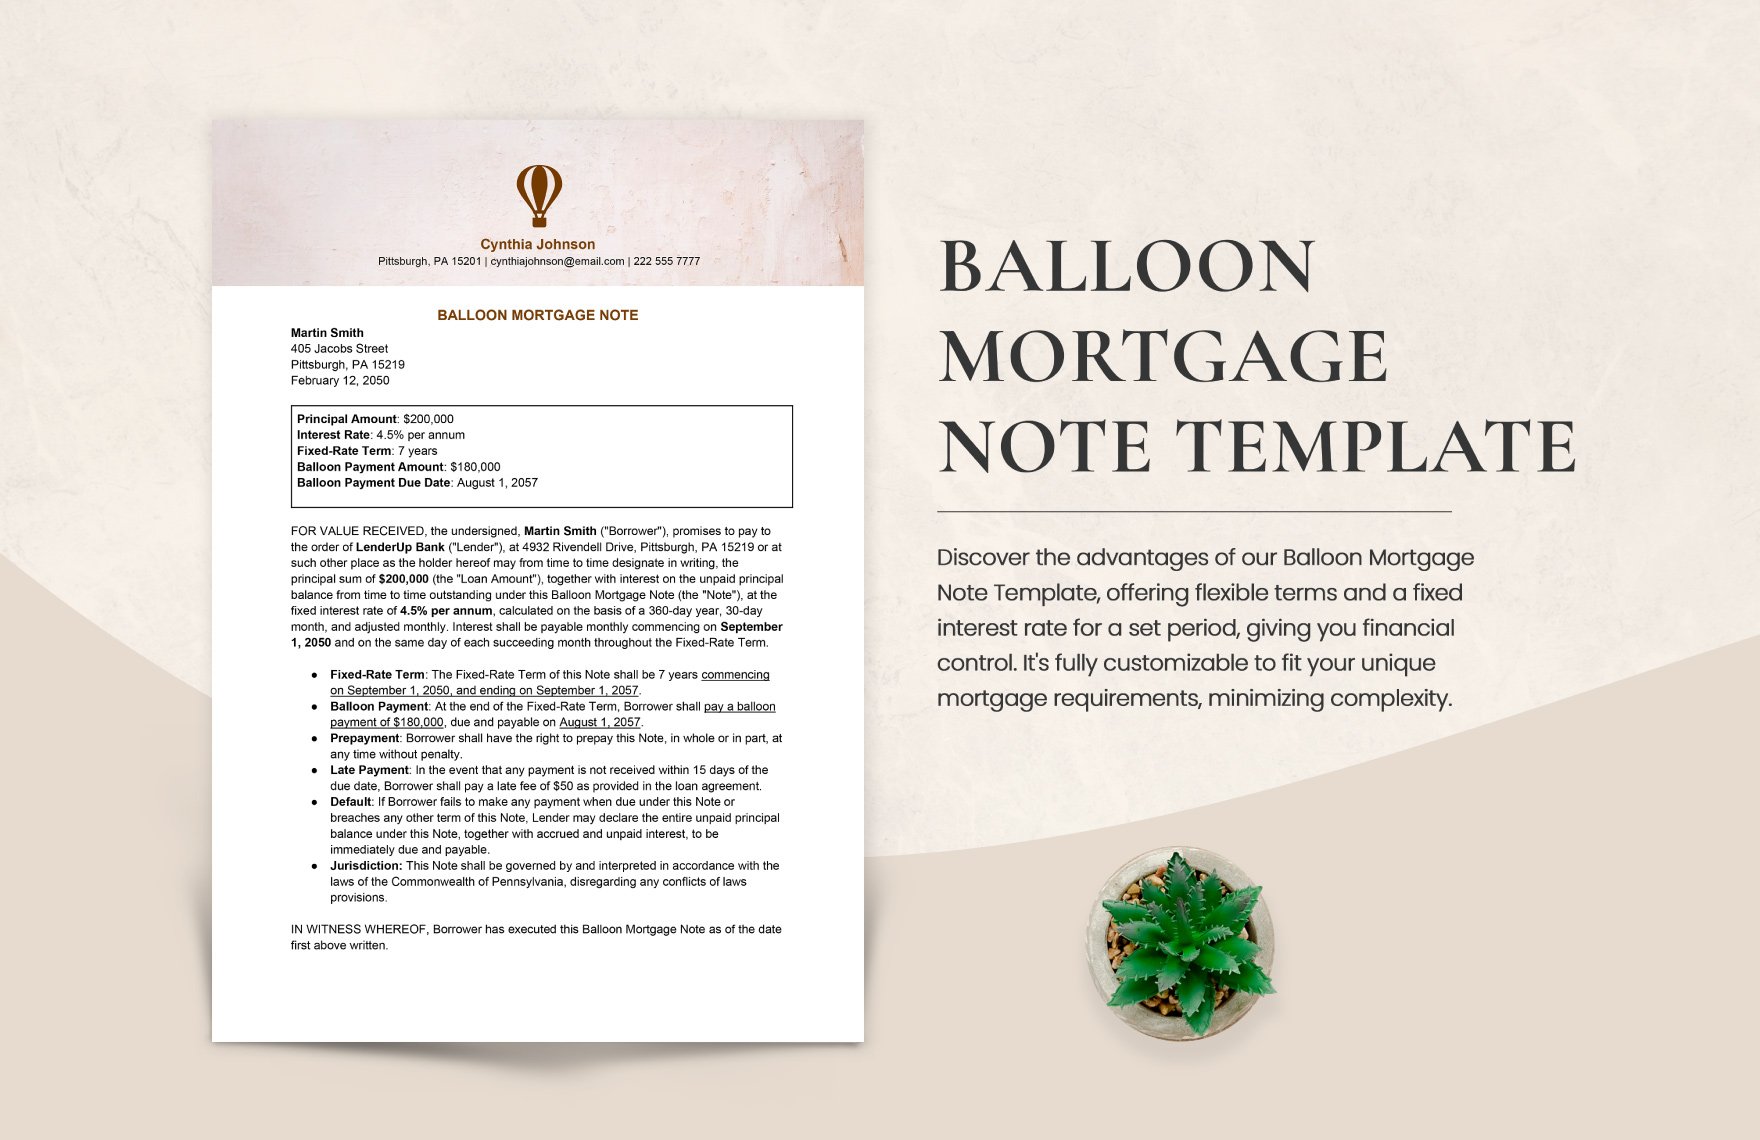 Balloon Mortgage Note Template